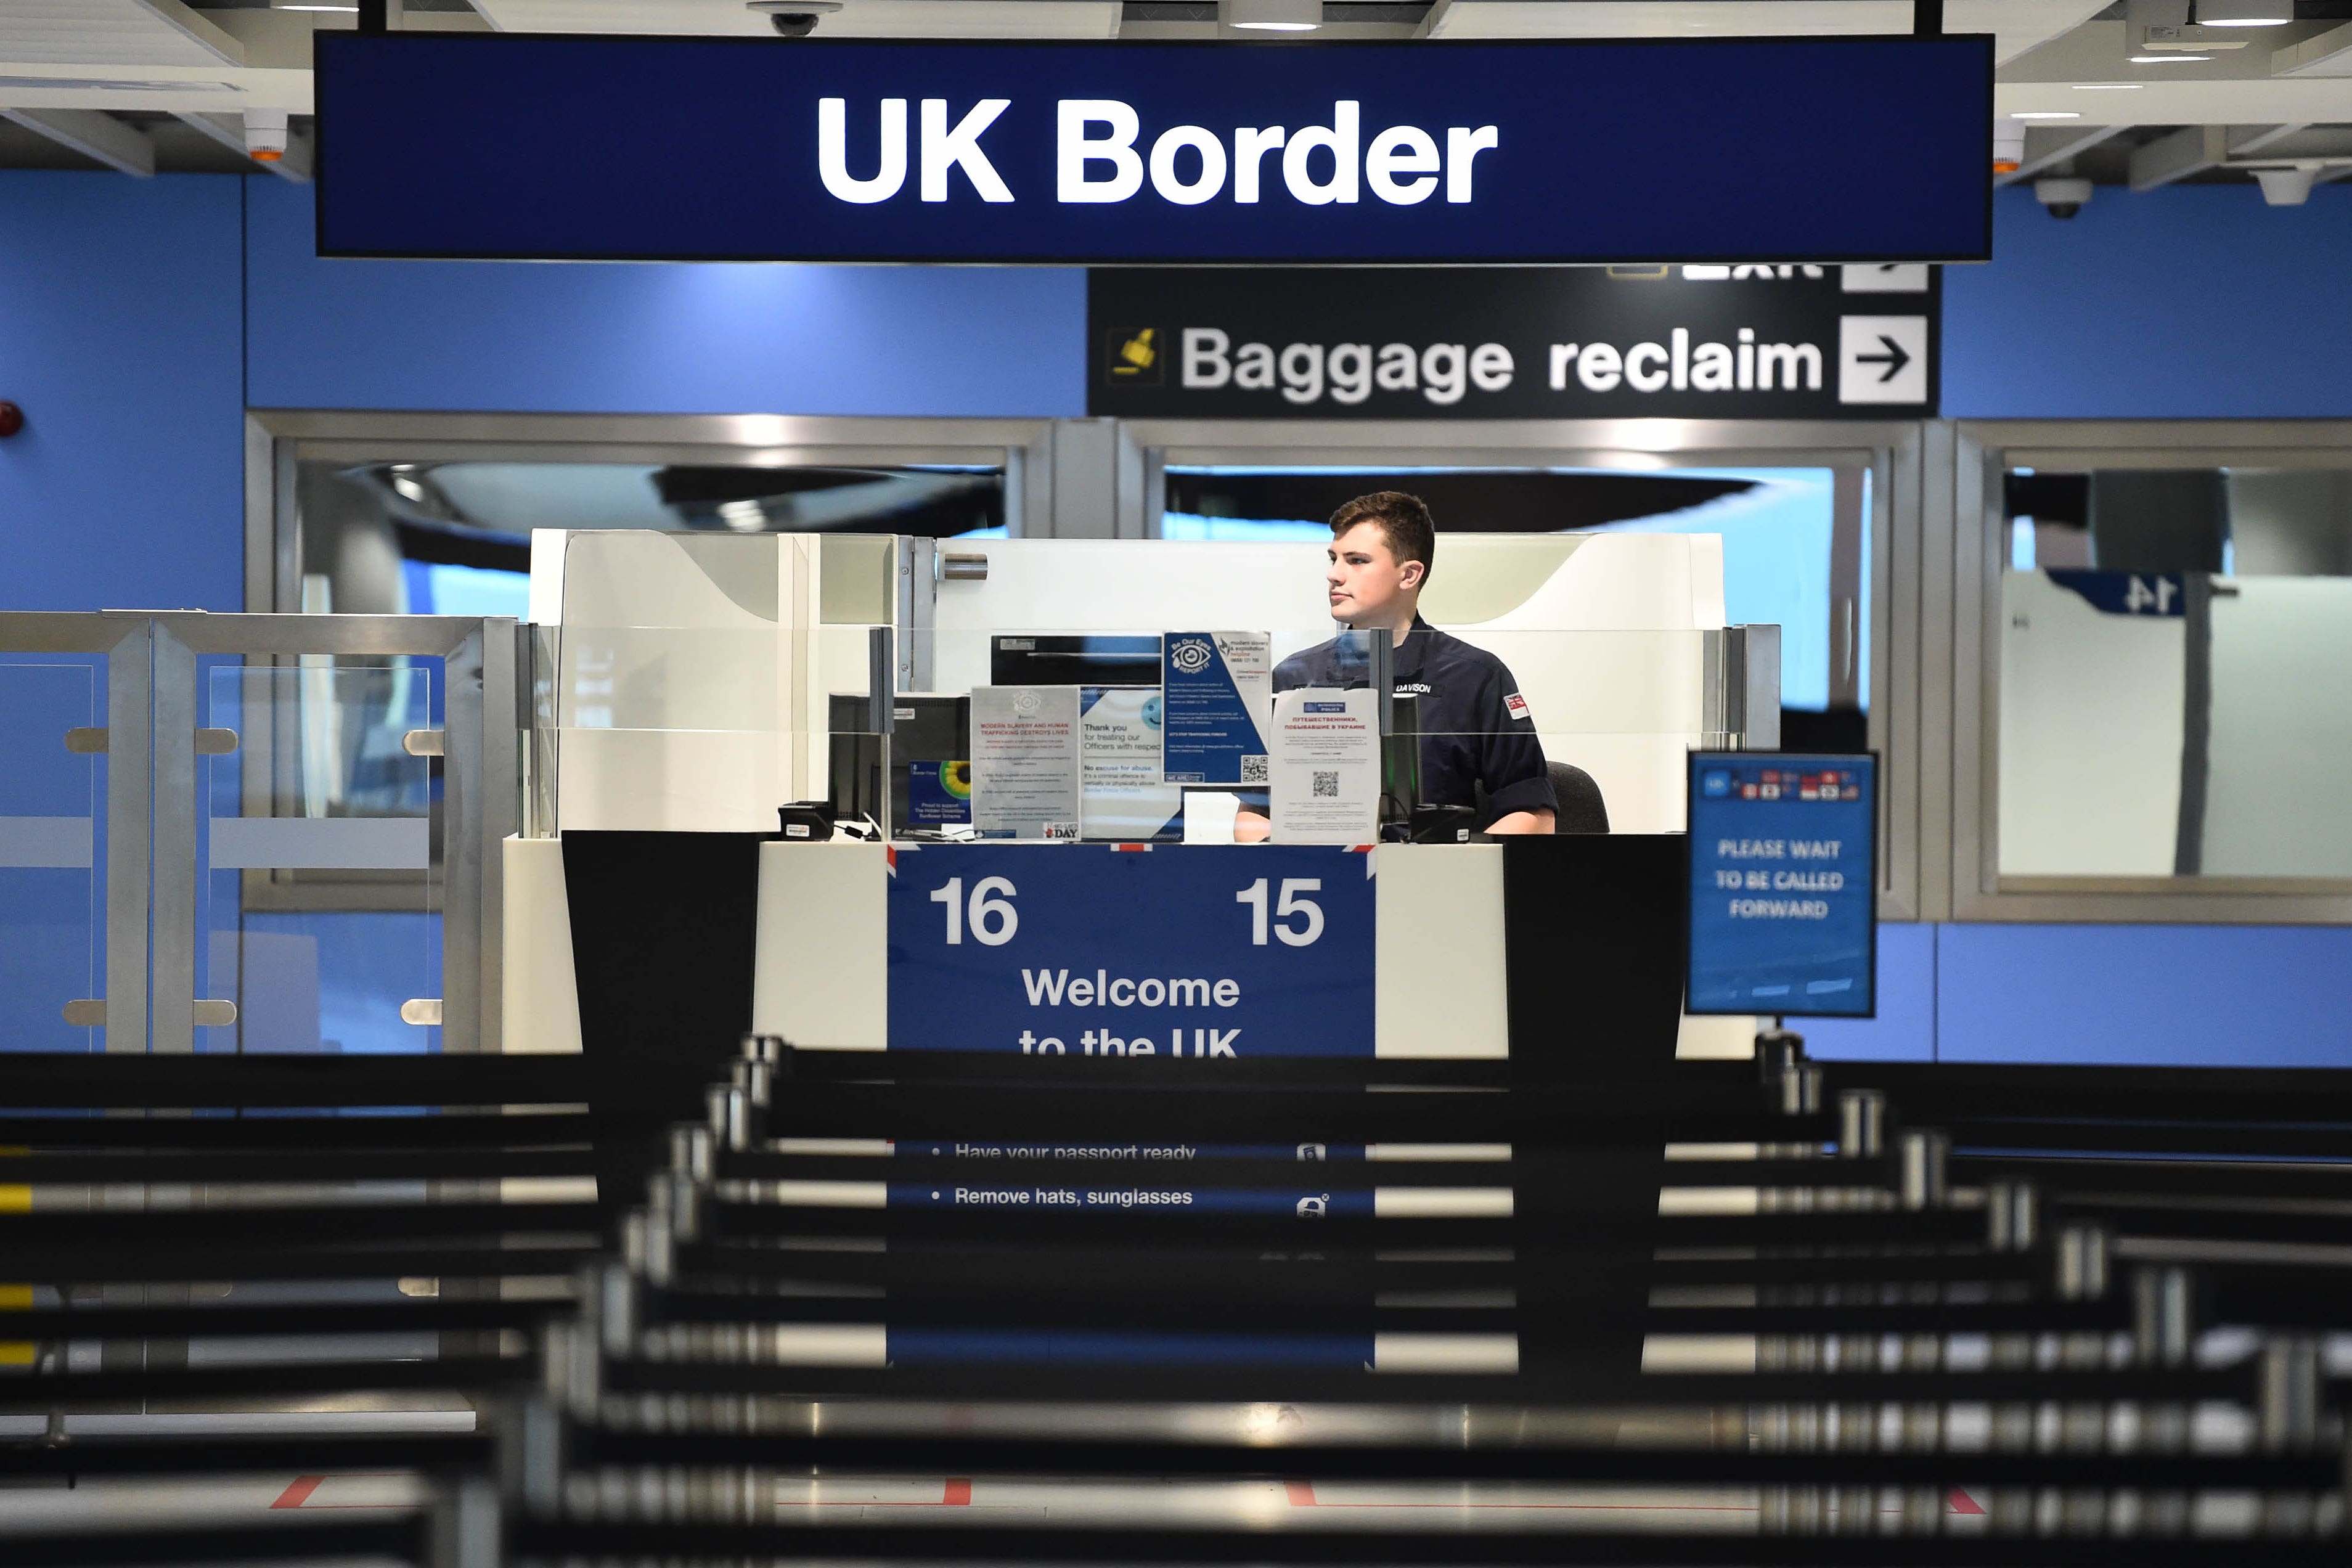 Net migration to the UK has reached a record level